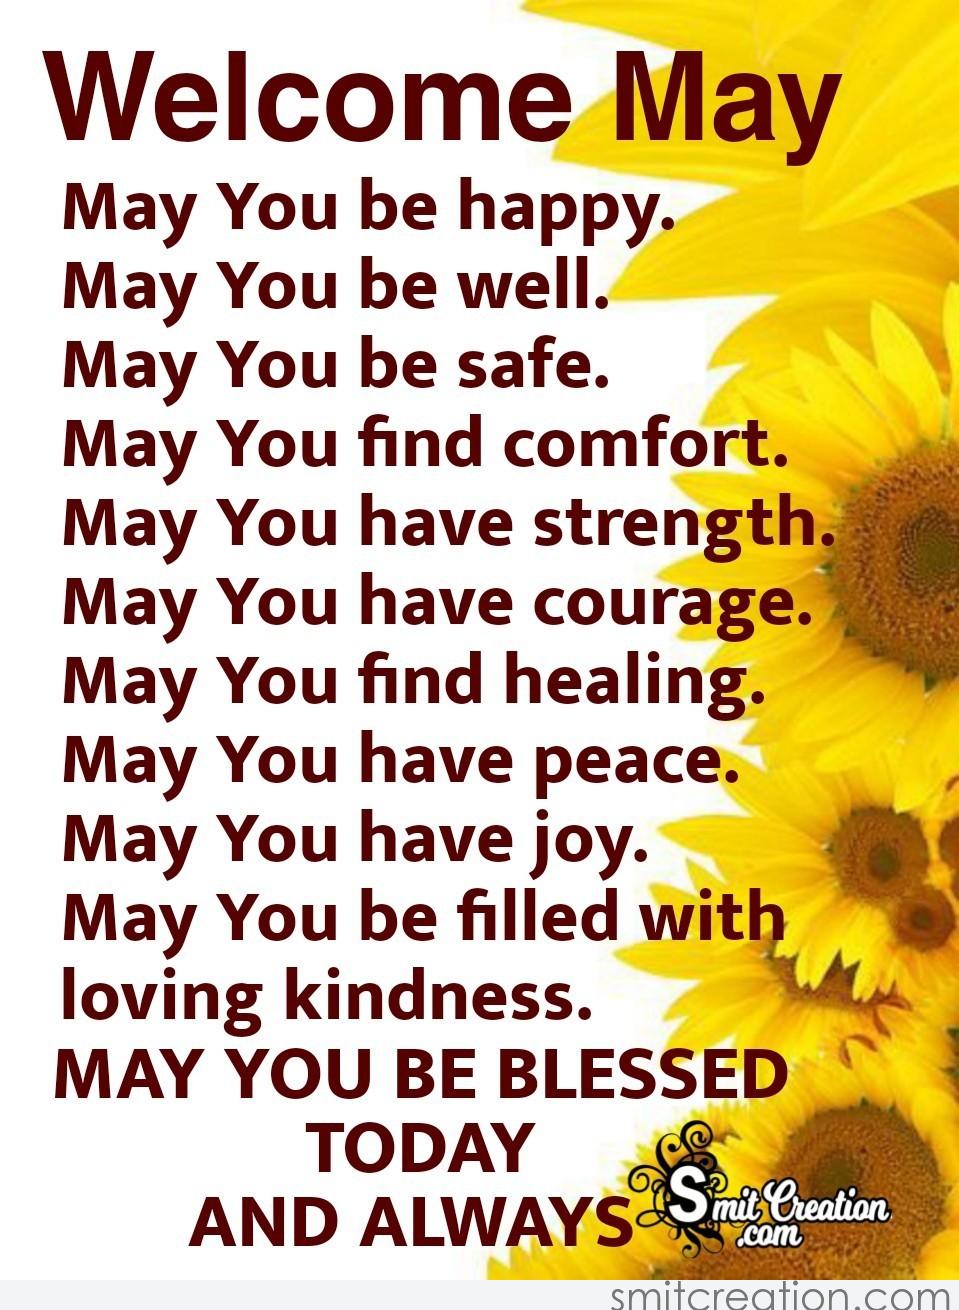 May Month Blessings - SmitCreation.com